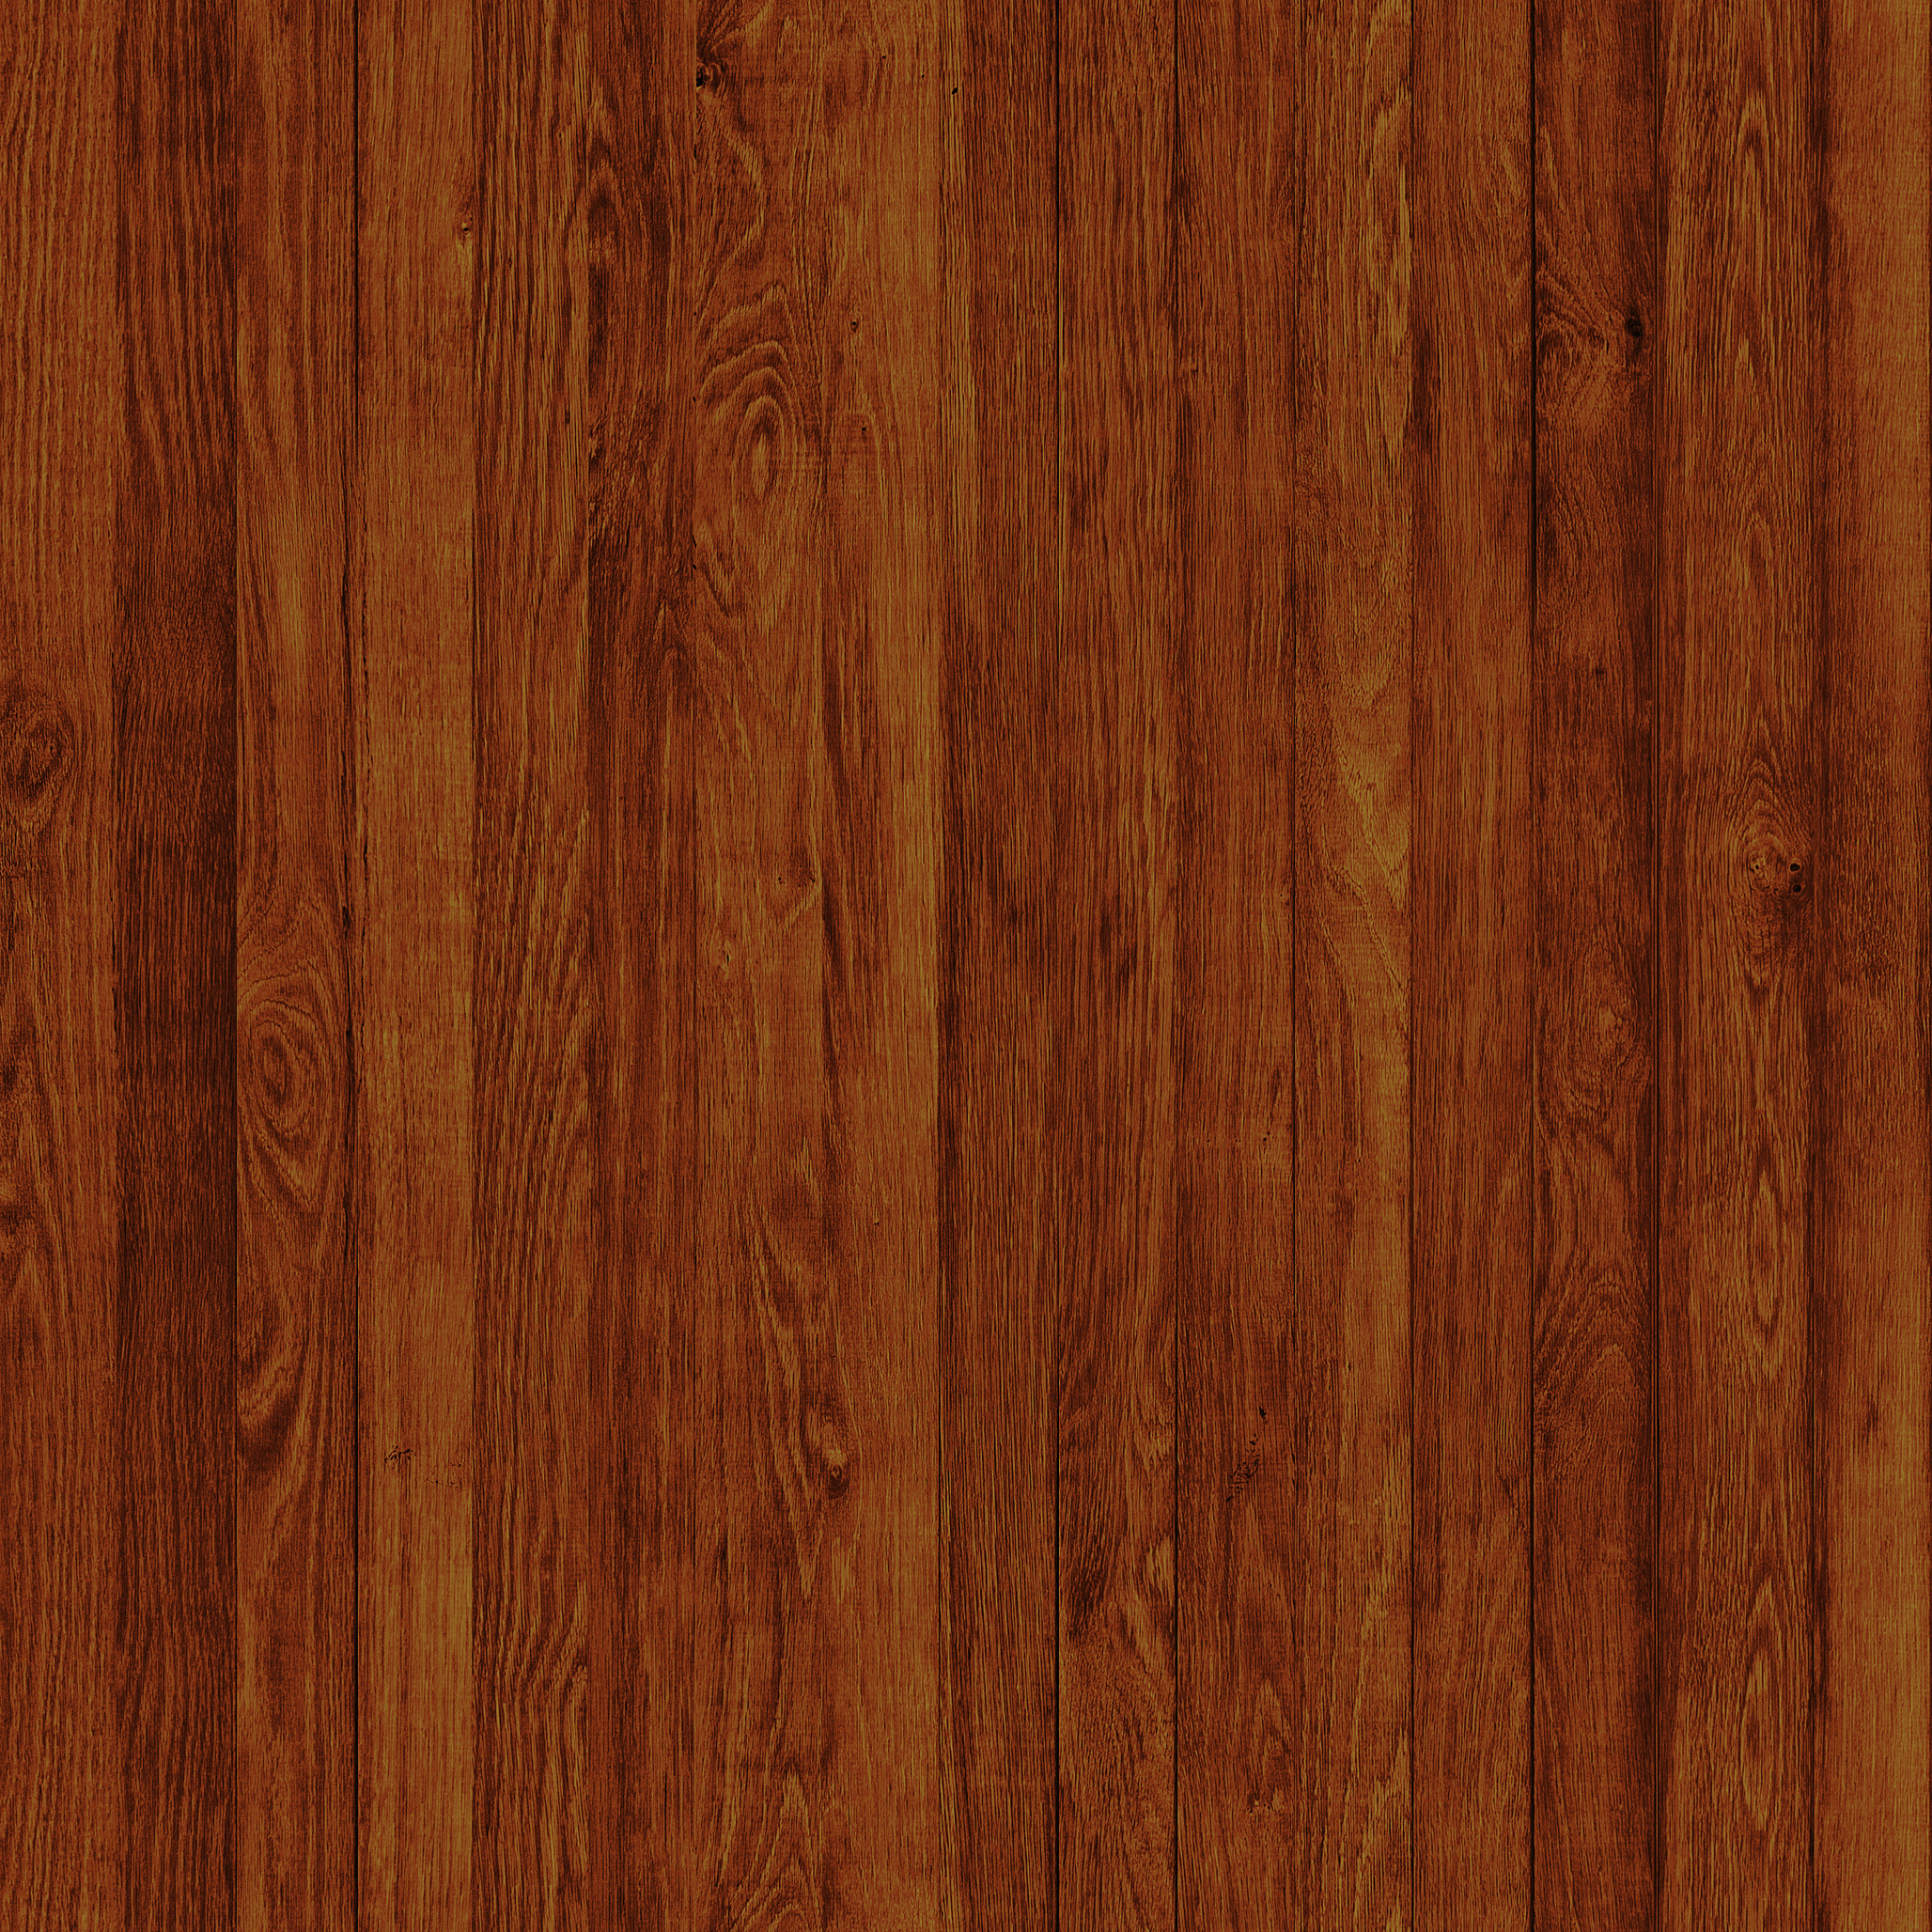 Wood Flooring Textures Pic2fly